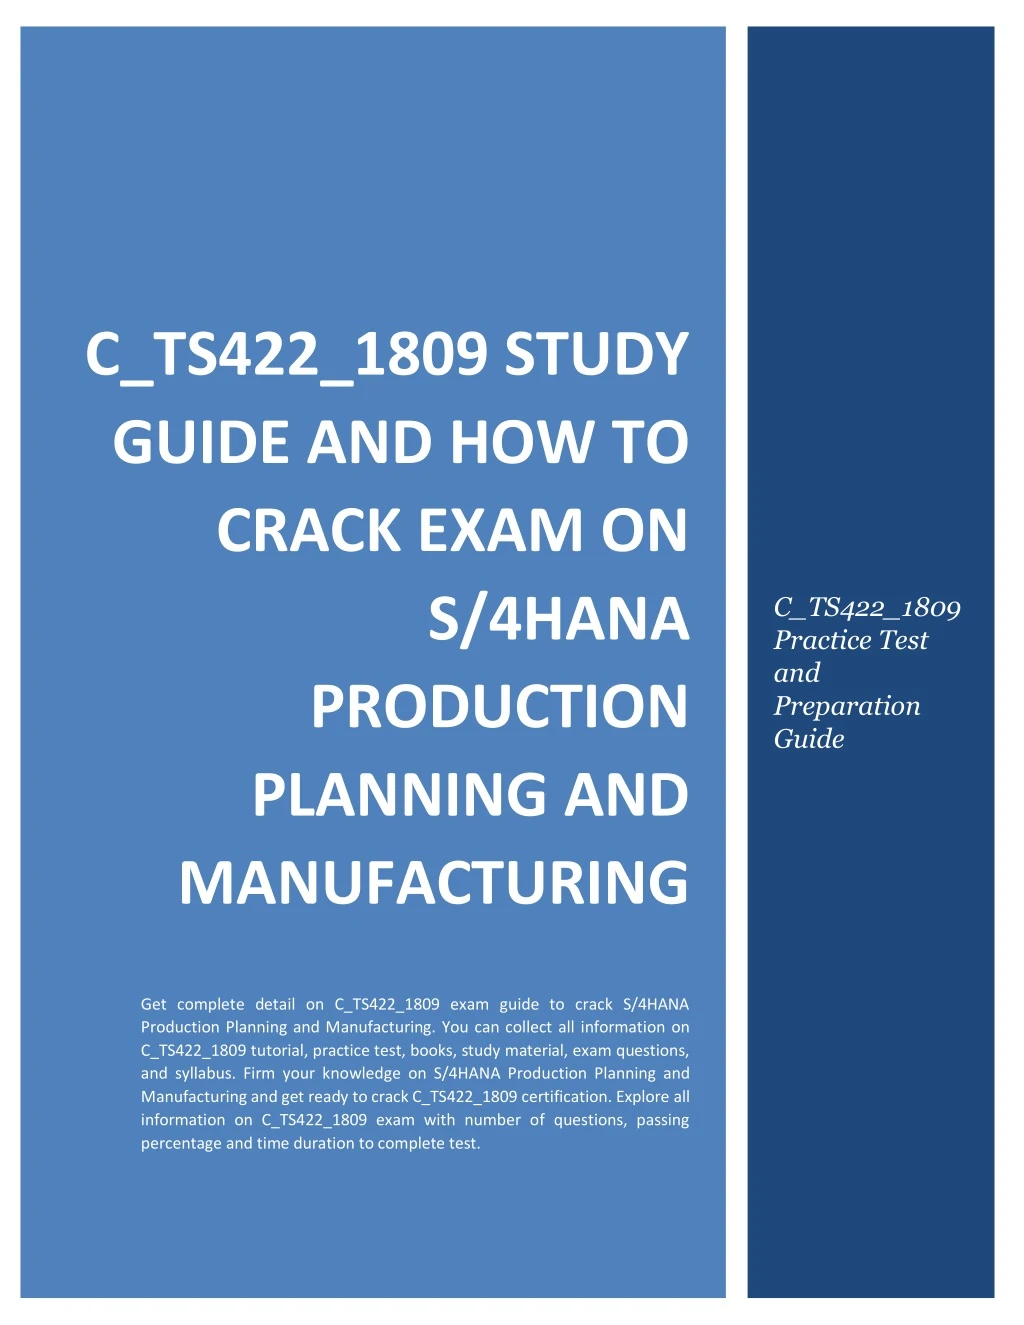 c ts422 1809 study guide and how to crack exam on